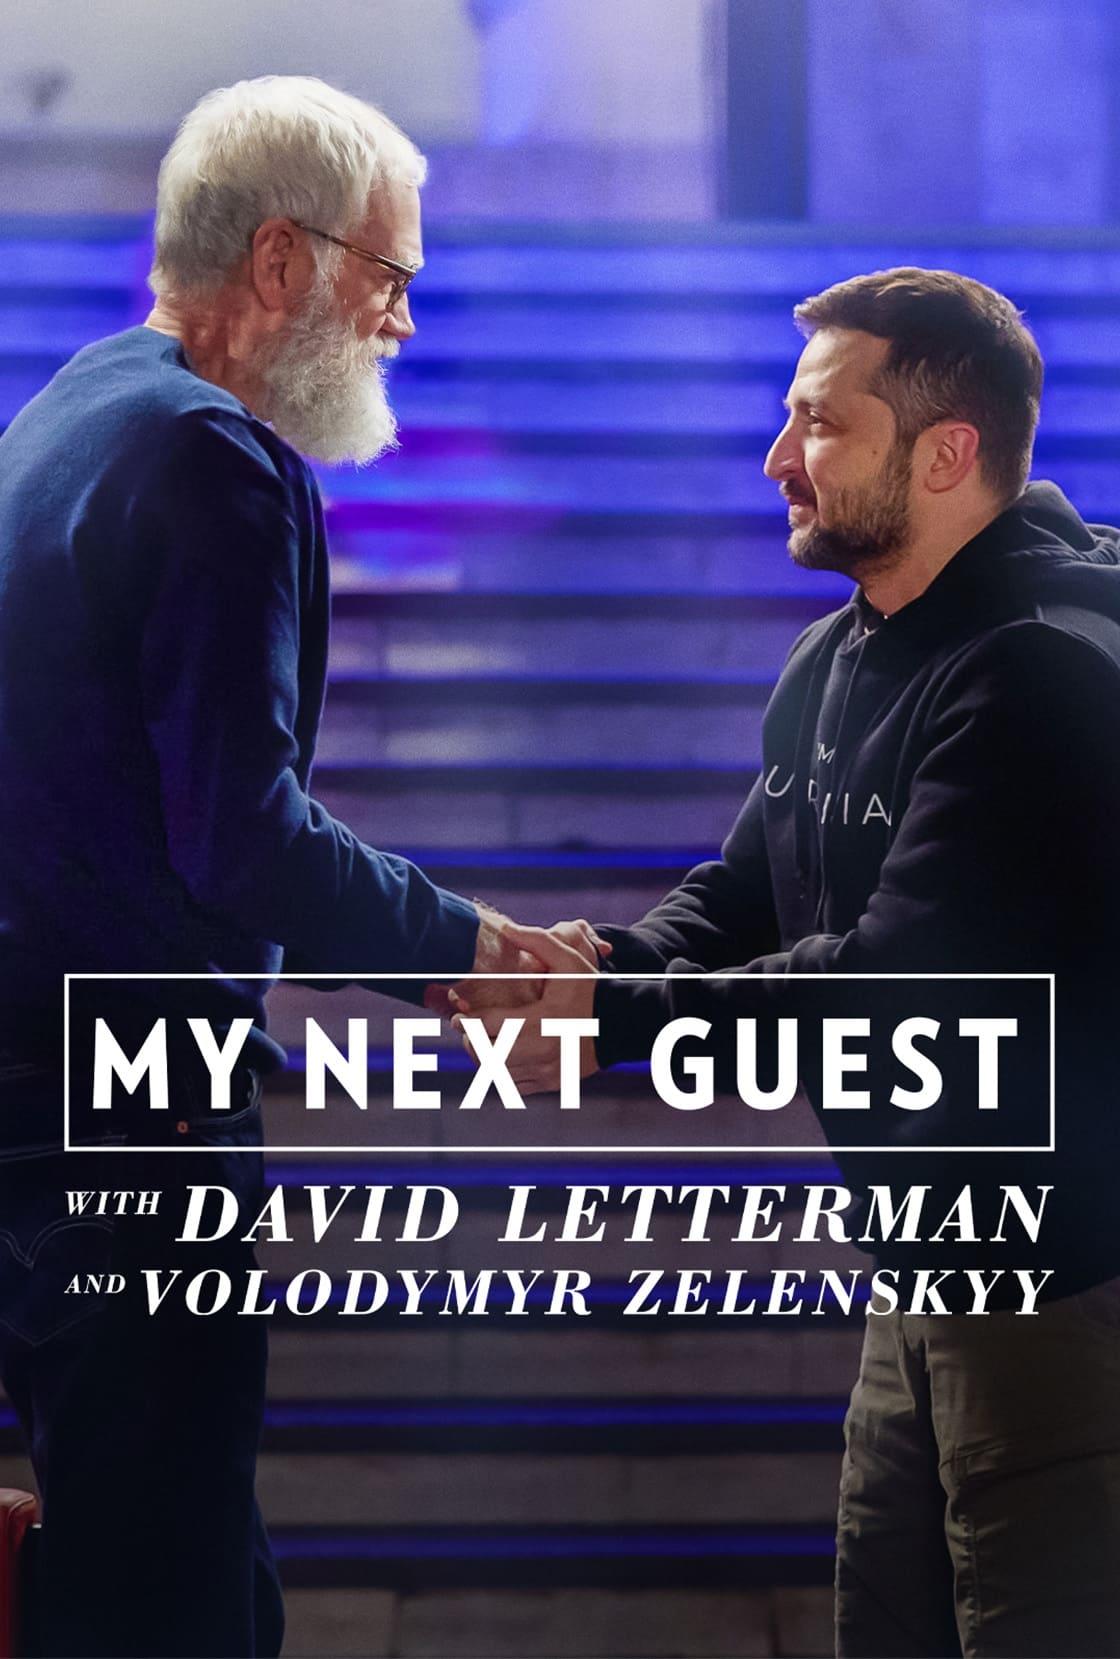 My Next Guest with David Letterman and Volodymyr Zelenskyy poster